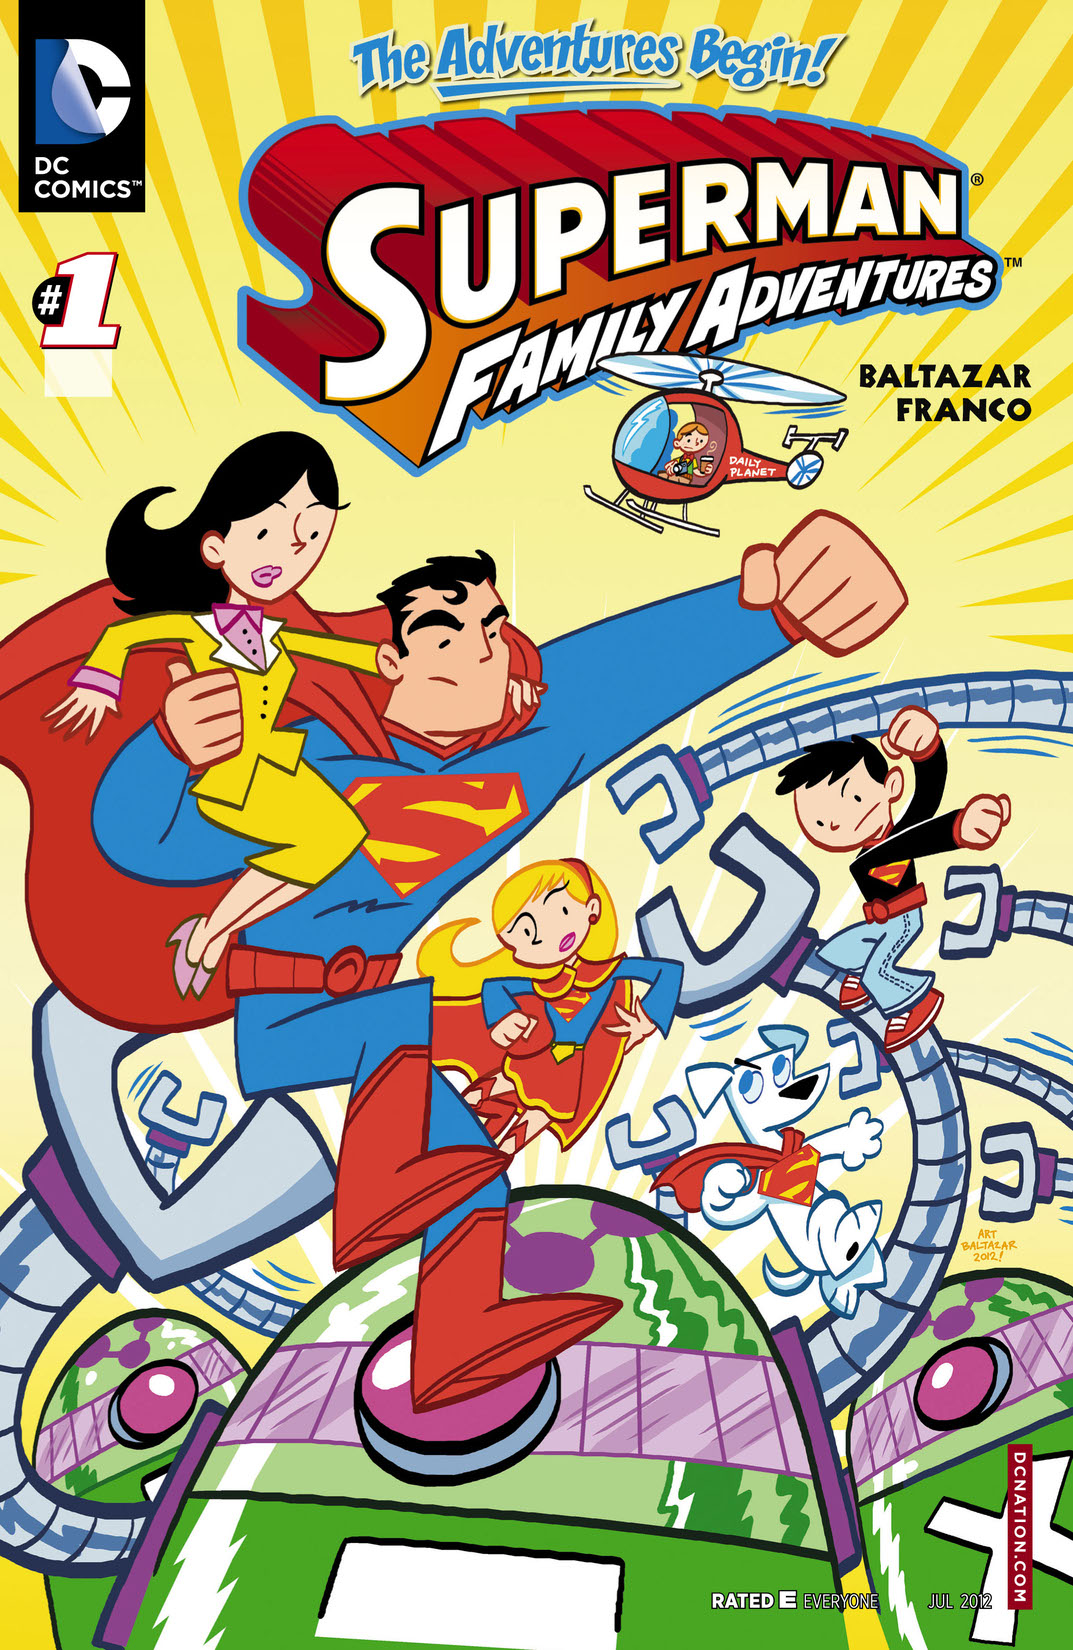 Superman Family Adventures #1 preview images